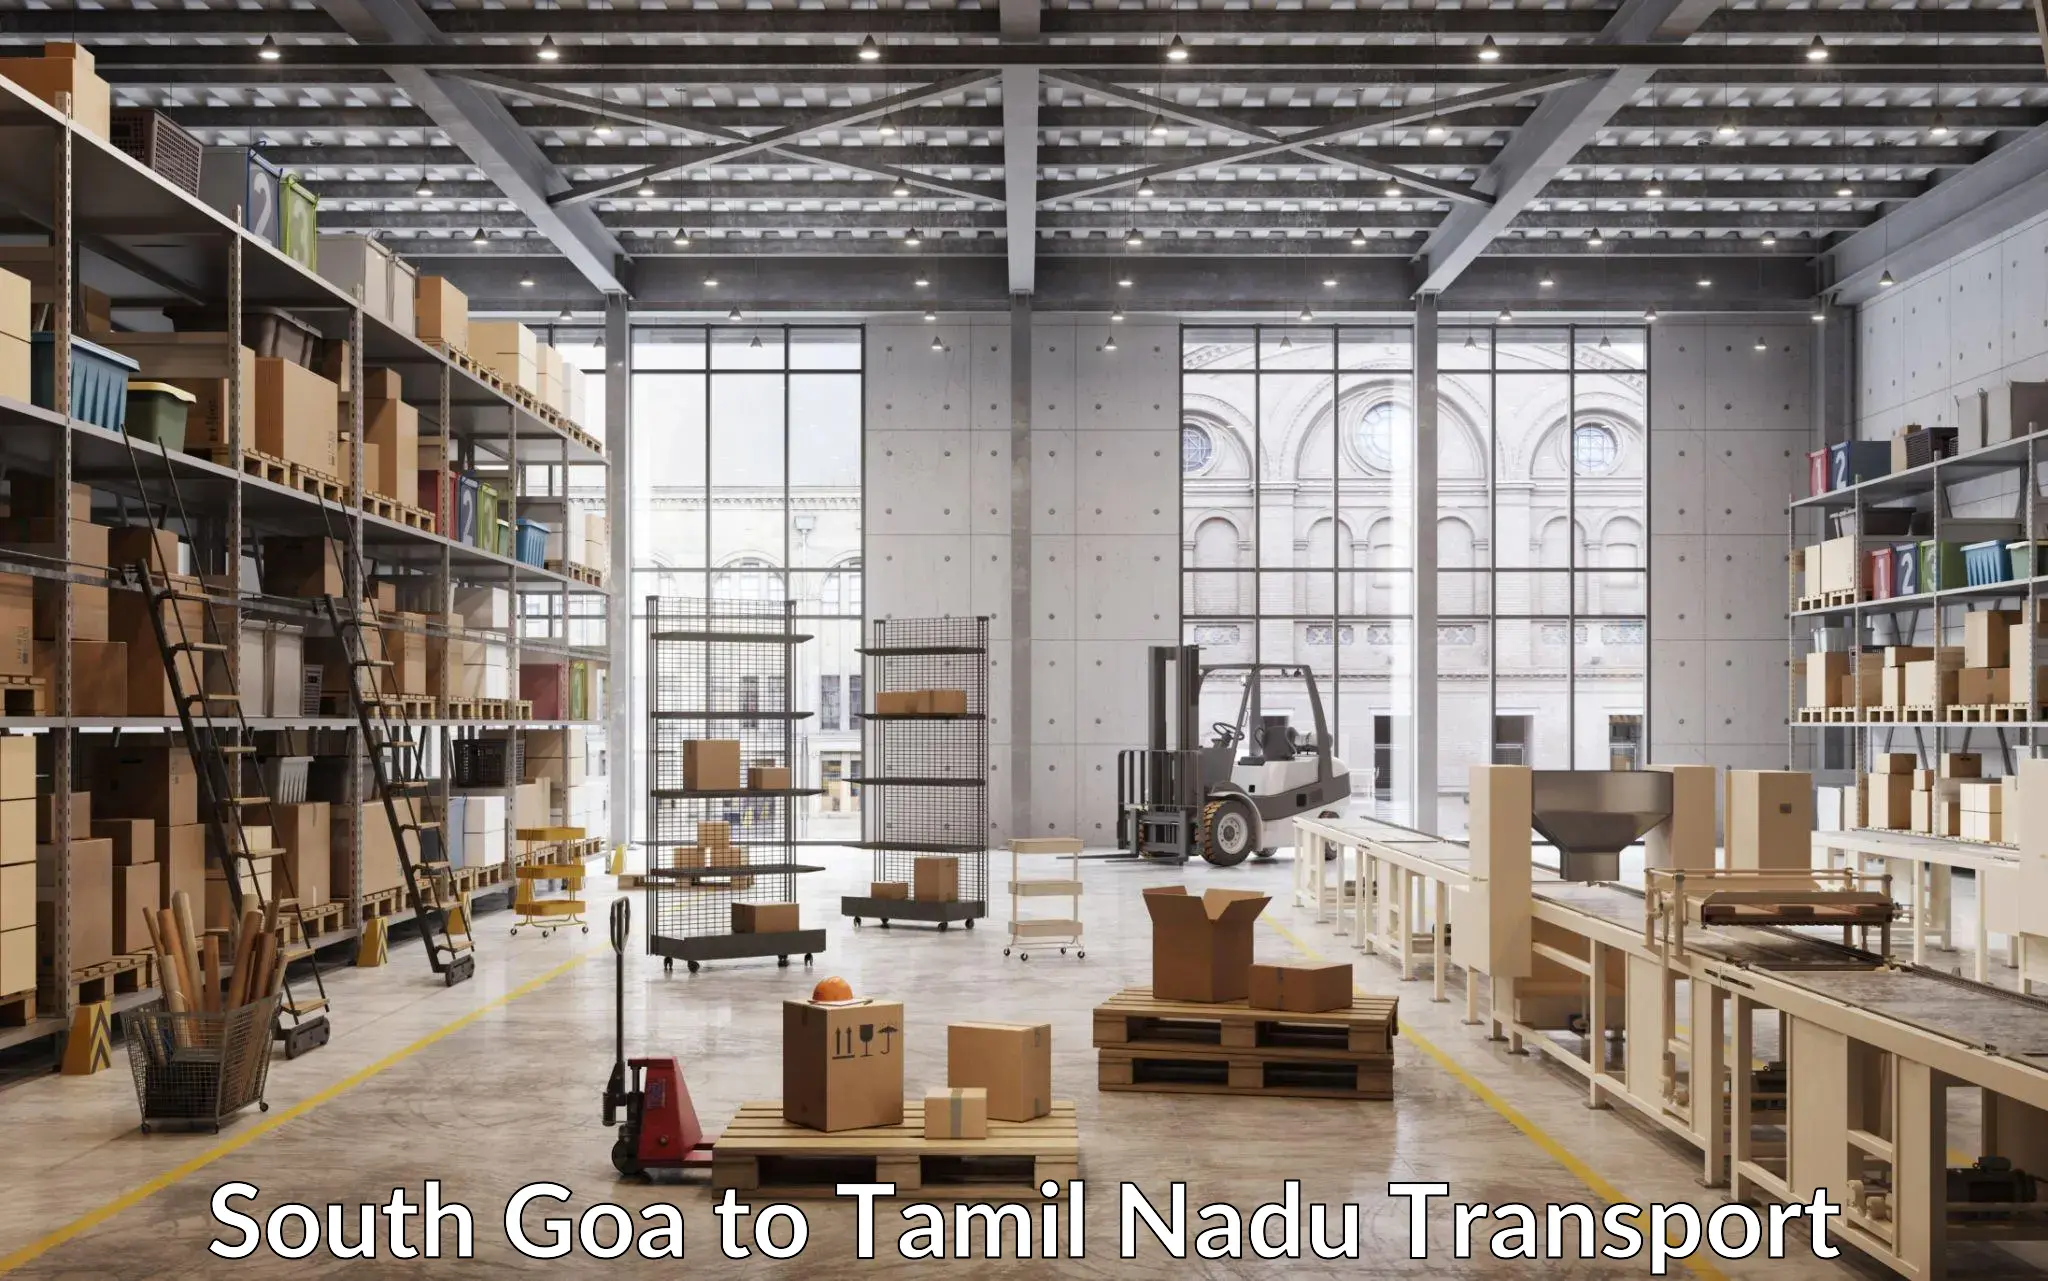 Cargo train transport services South Goa to Shanmugha Arts Science Technology and Research Academy Thanjavur